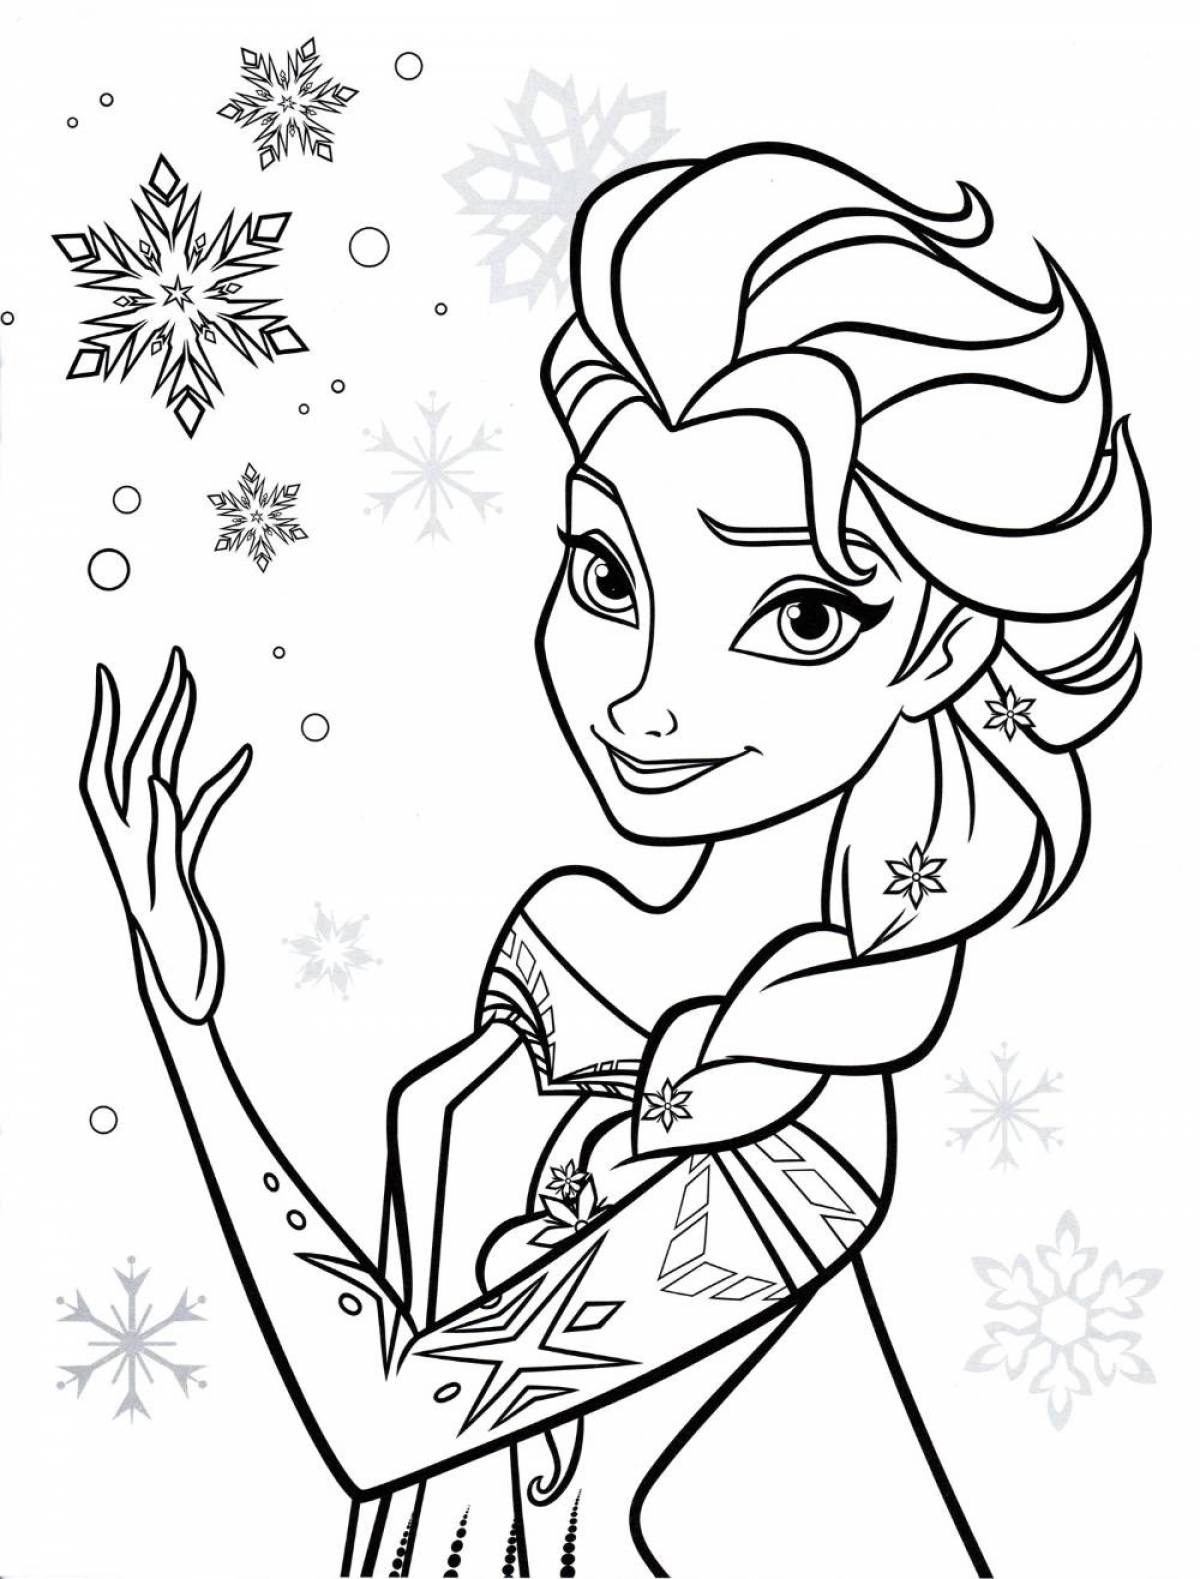 Colourful elsa and anna coloring book for kids